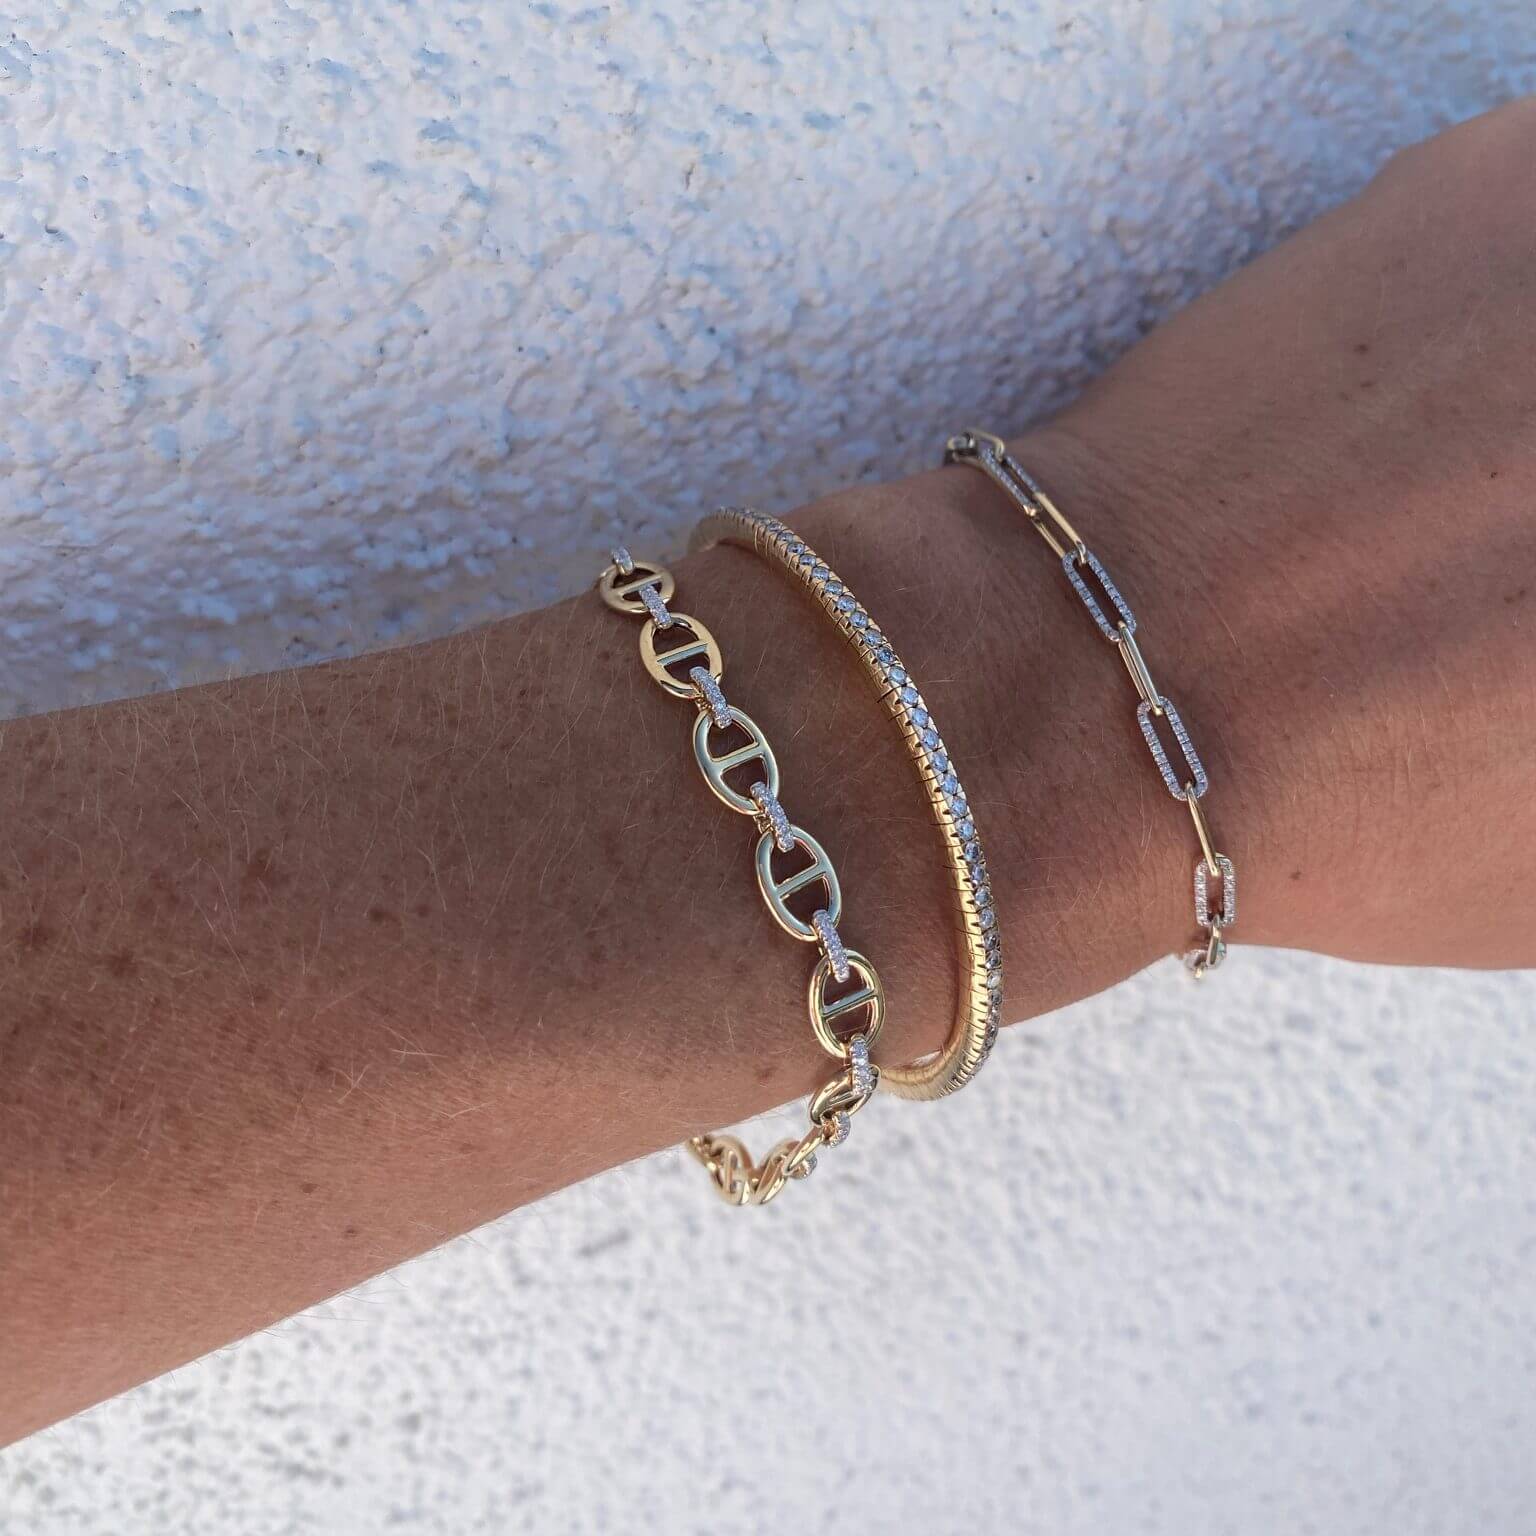 Diamond Link & Anchor Chain Bracelet and Solid & Pave Paper Clip Bracelet, both NEW at Moondance Jewelry